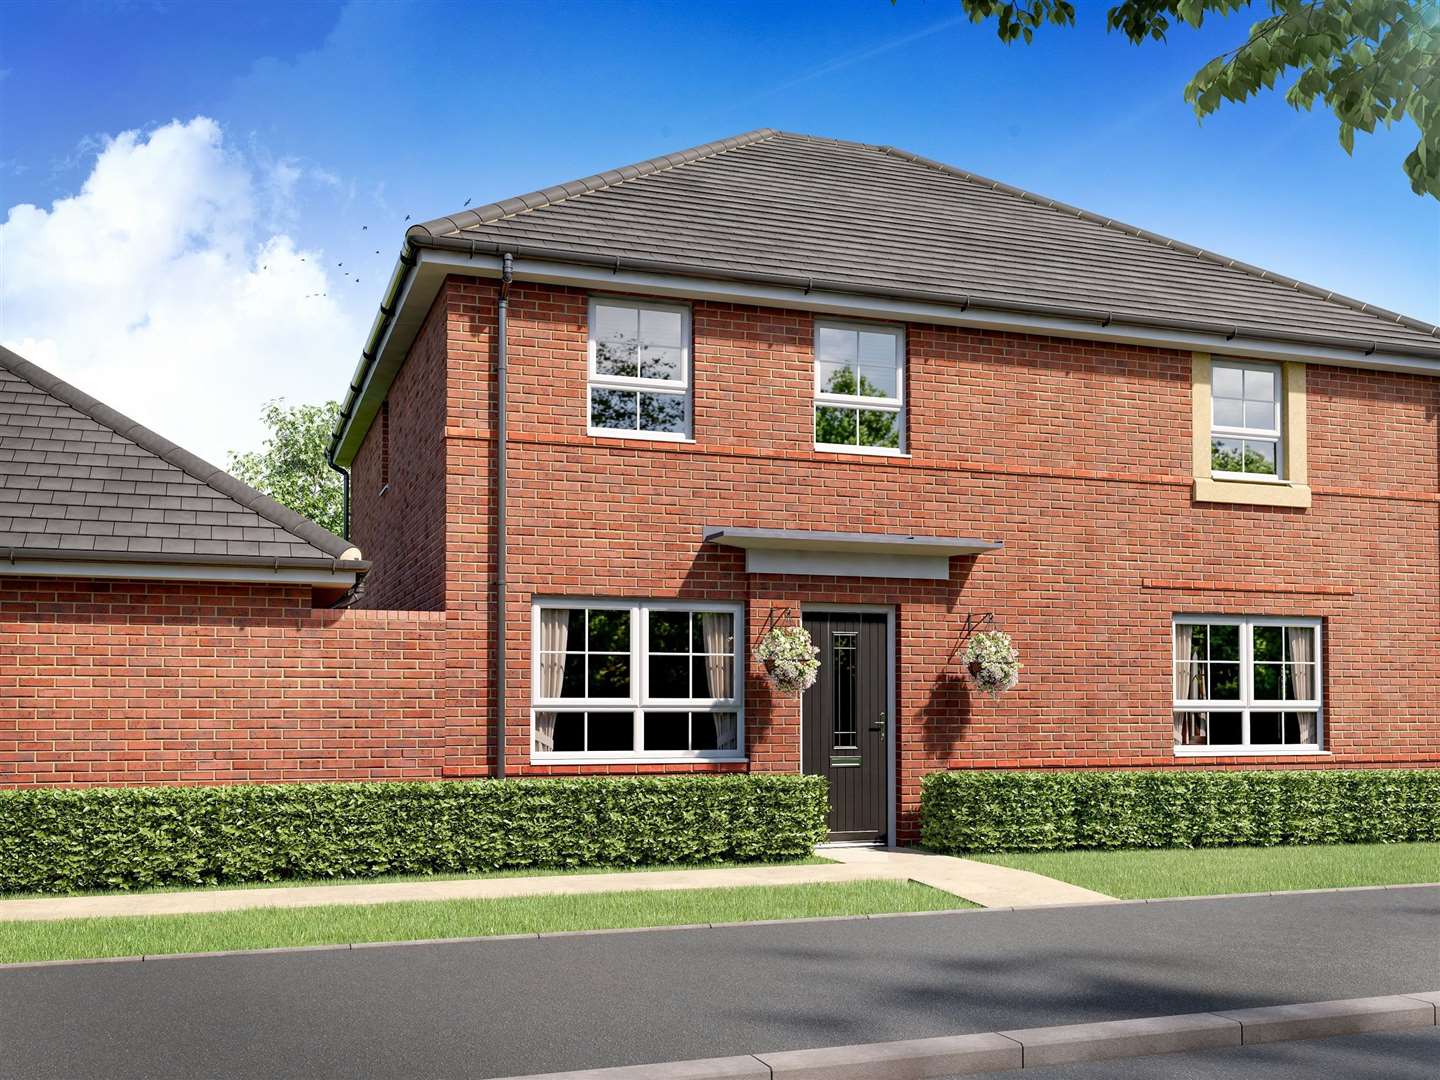 One of the Maidstone homes at Richmond Park. Picture: Barratt Homes